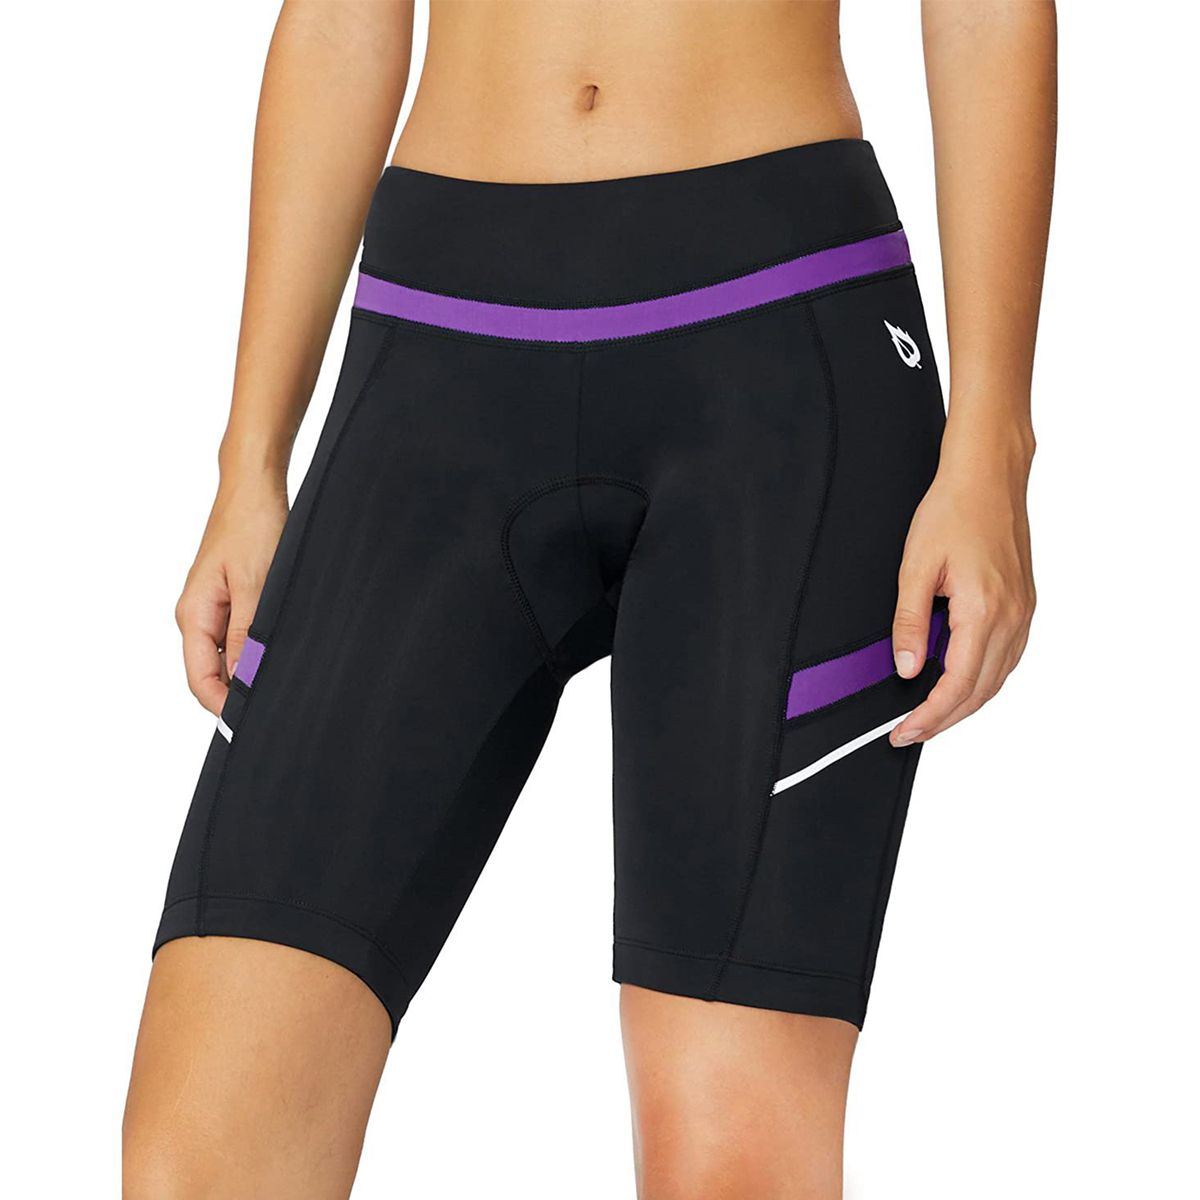 Best Padding For Cycling Shorts